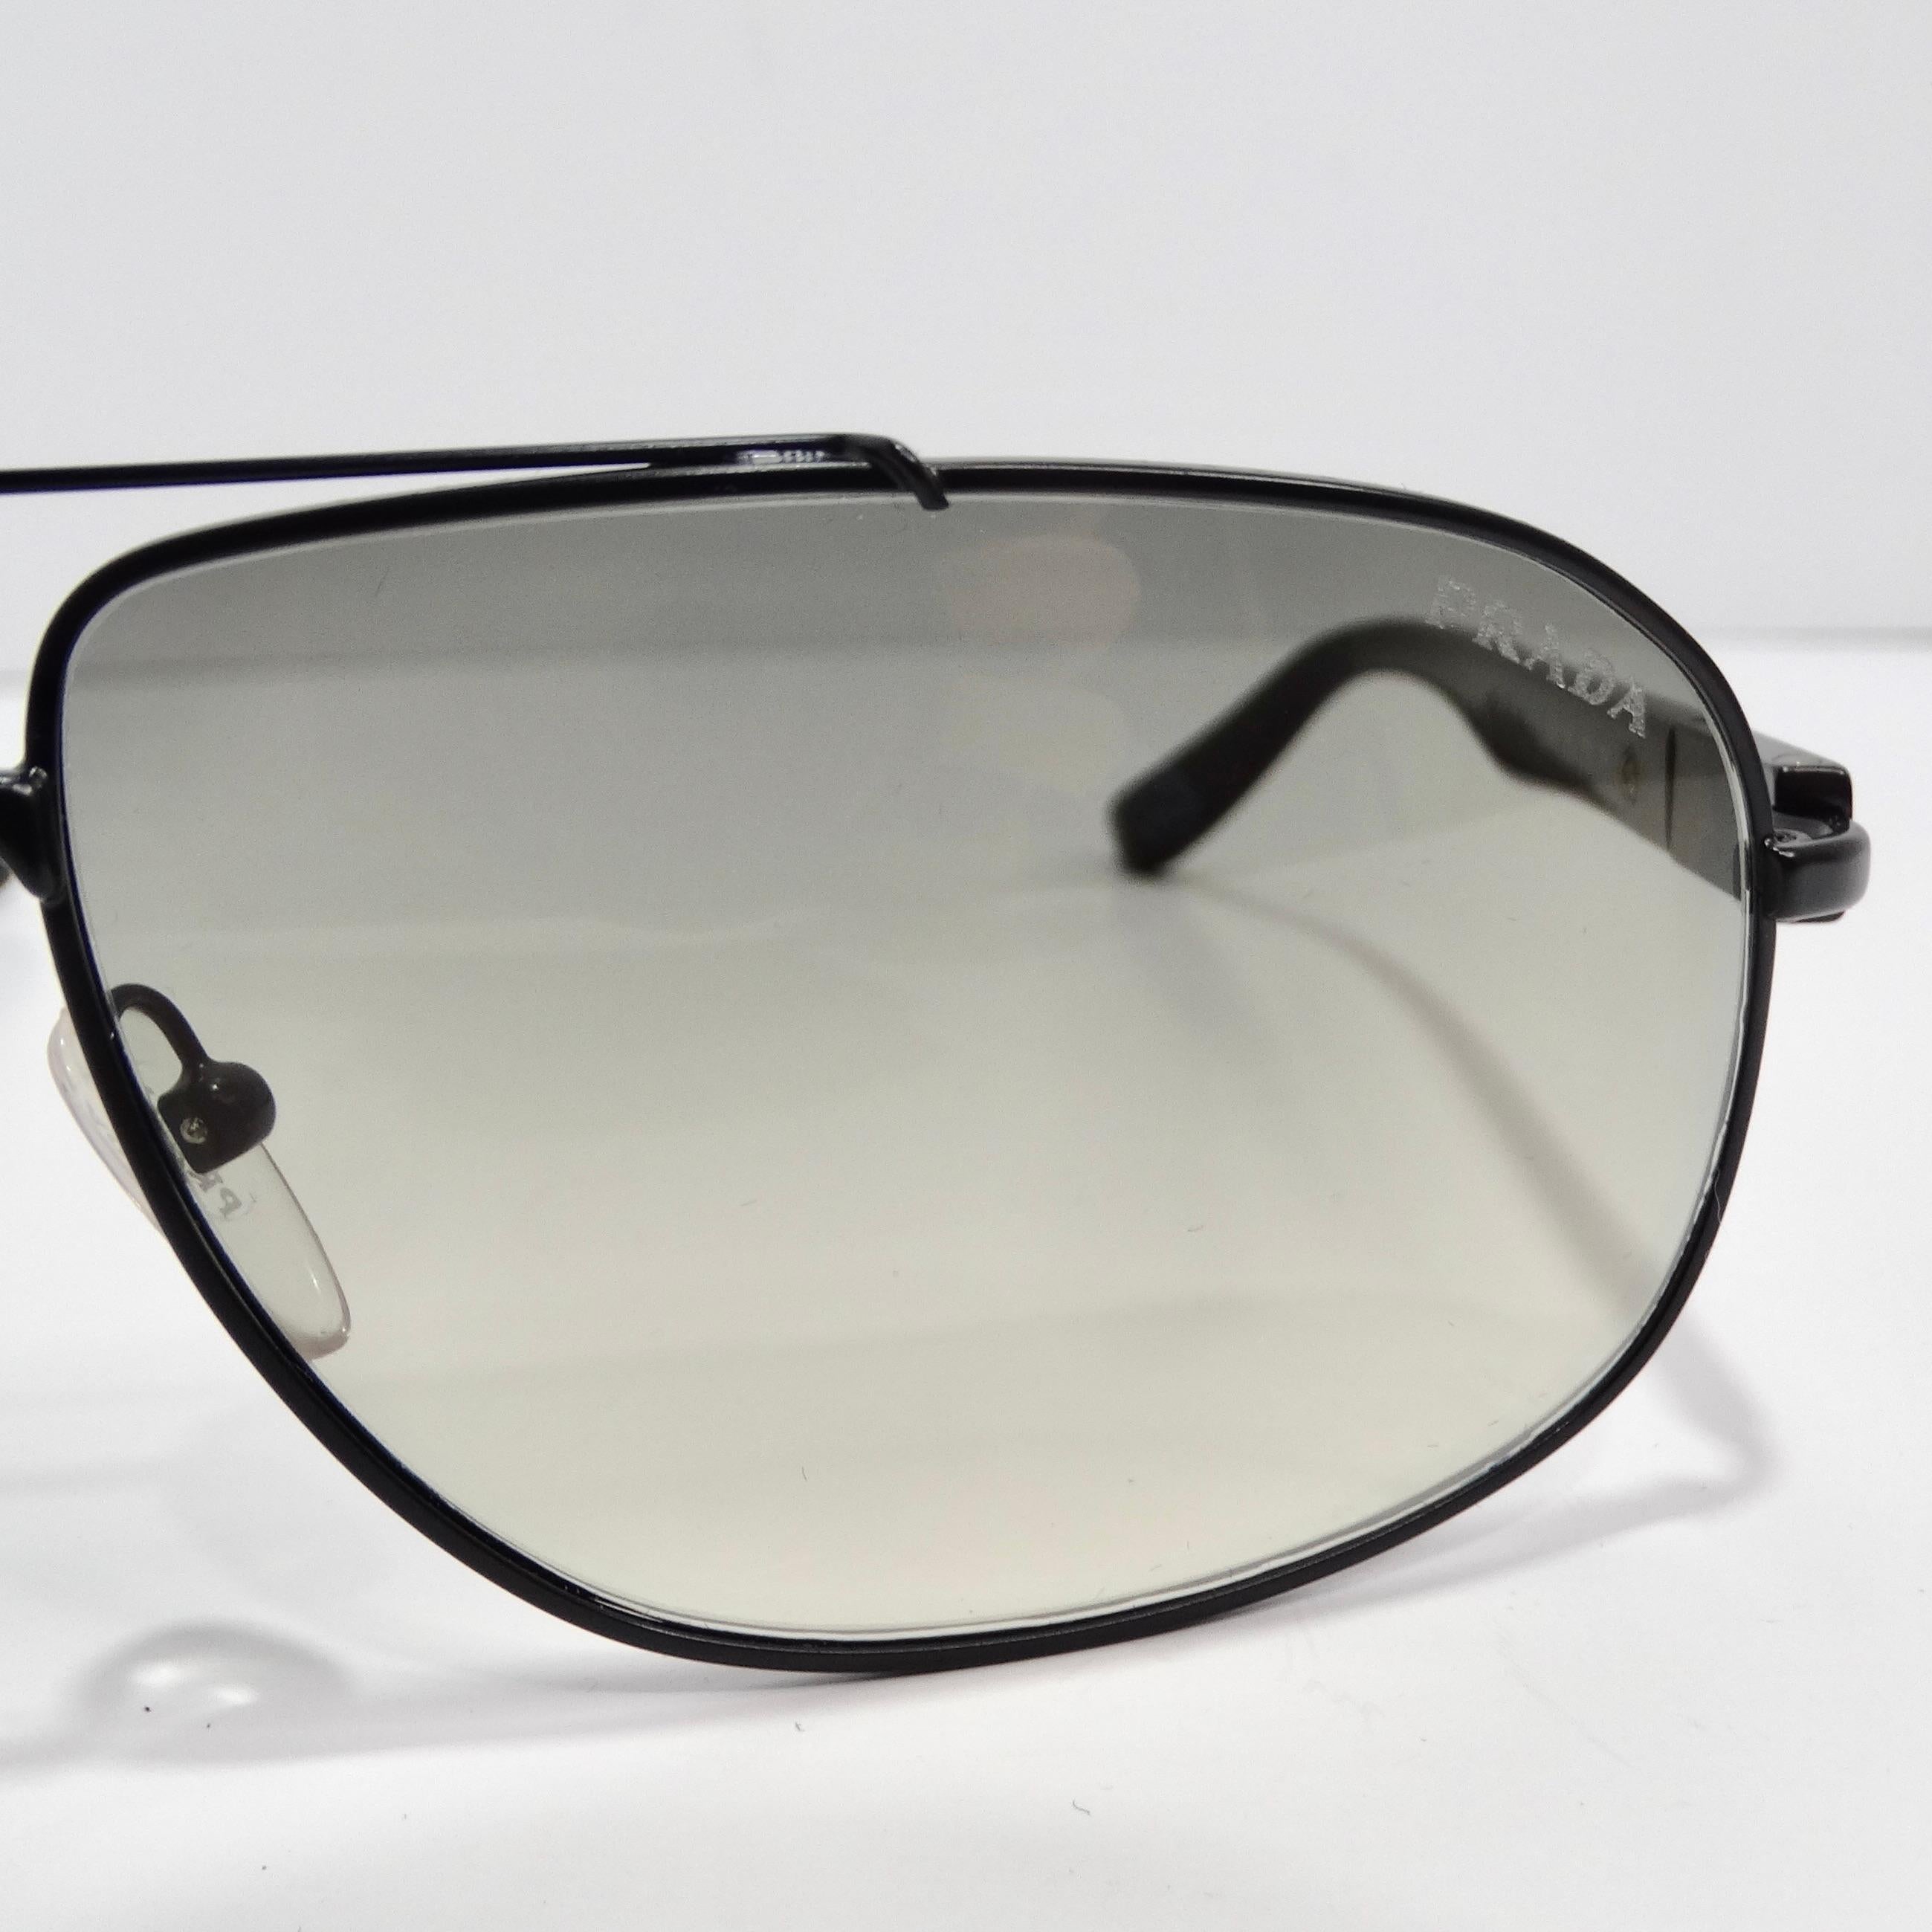 Enter the realm of timeless chic with the Prada 1990s Black & Blue Tortoise Aviator Sunglasses, a classic aviator style that effortlessly combines sophistication with a touch of contemporary flair. These sunglasses feature thin black rims and arms